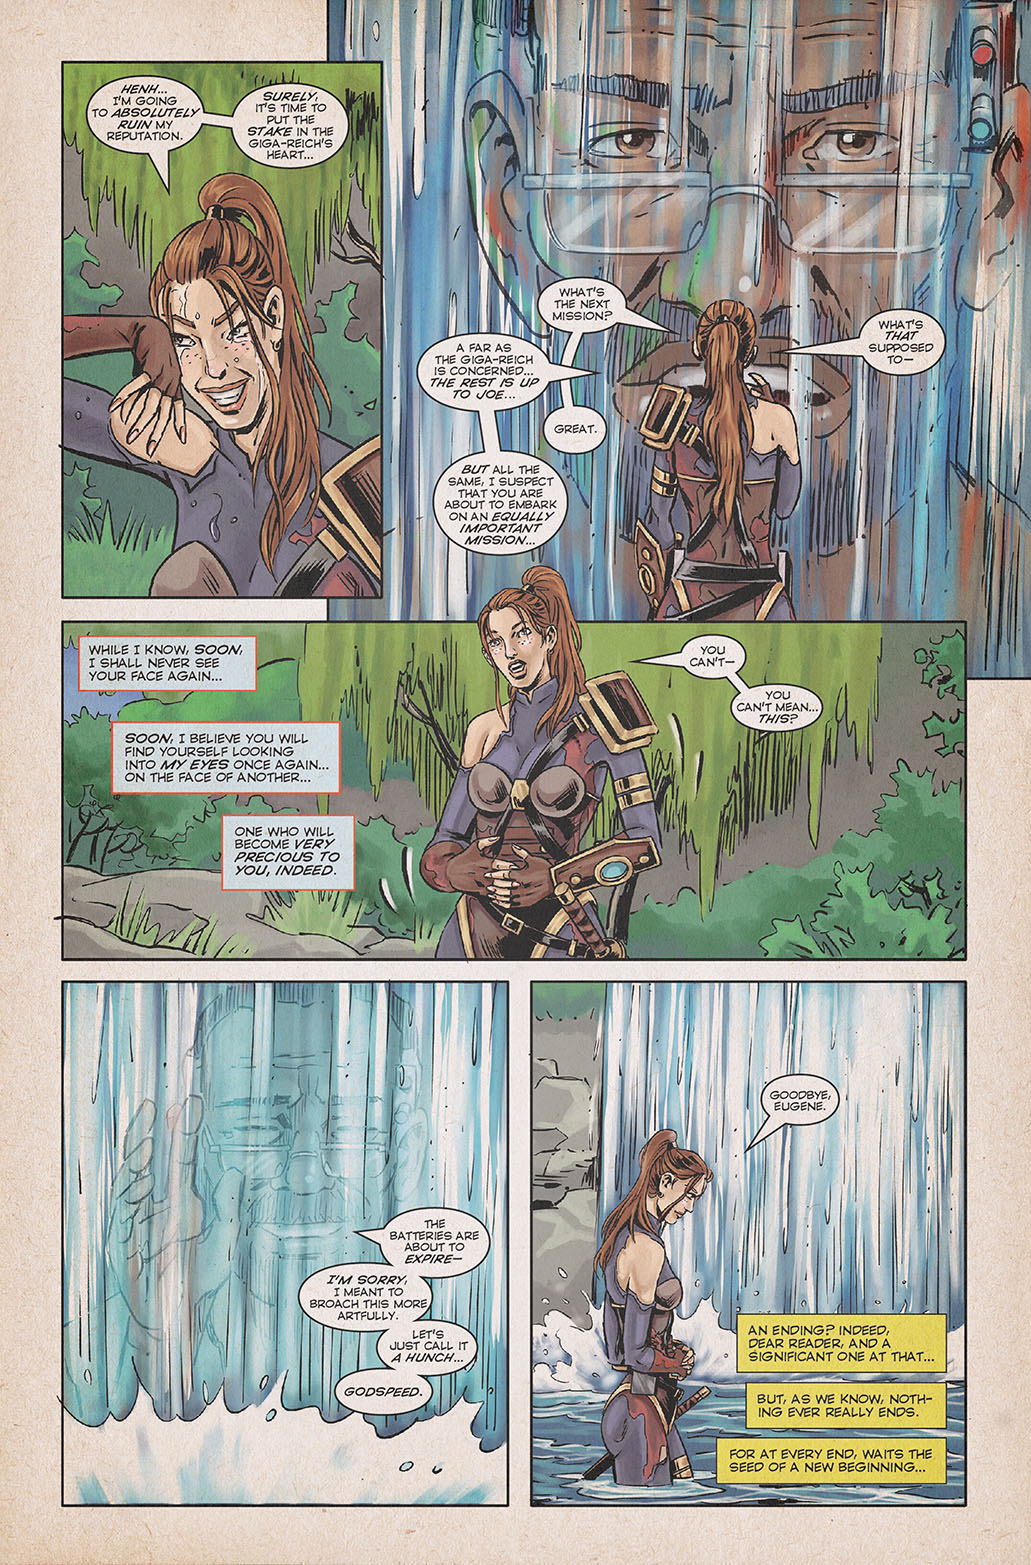 Our Fearful Trip is Done – Page 54